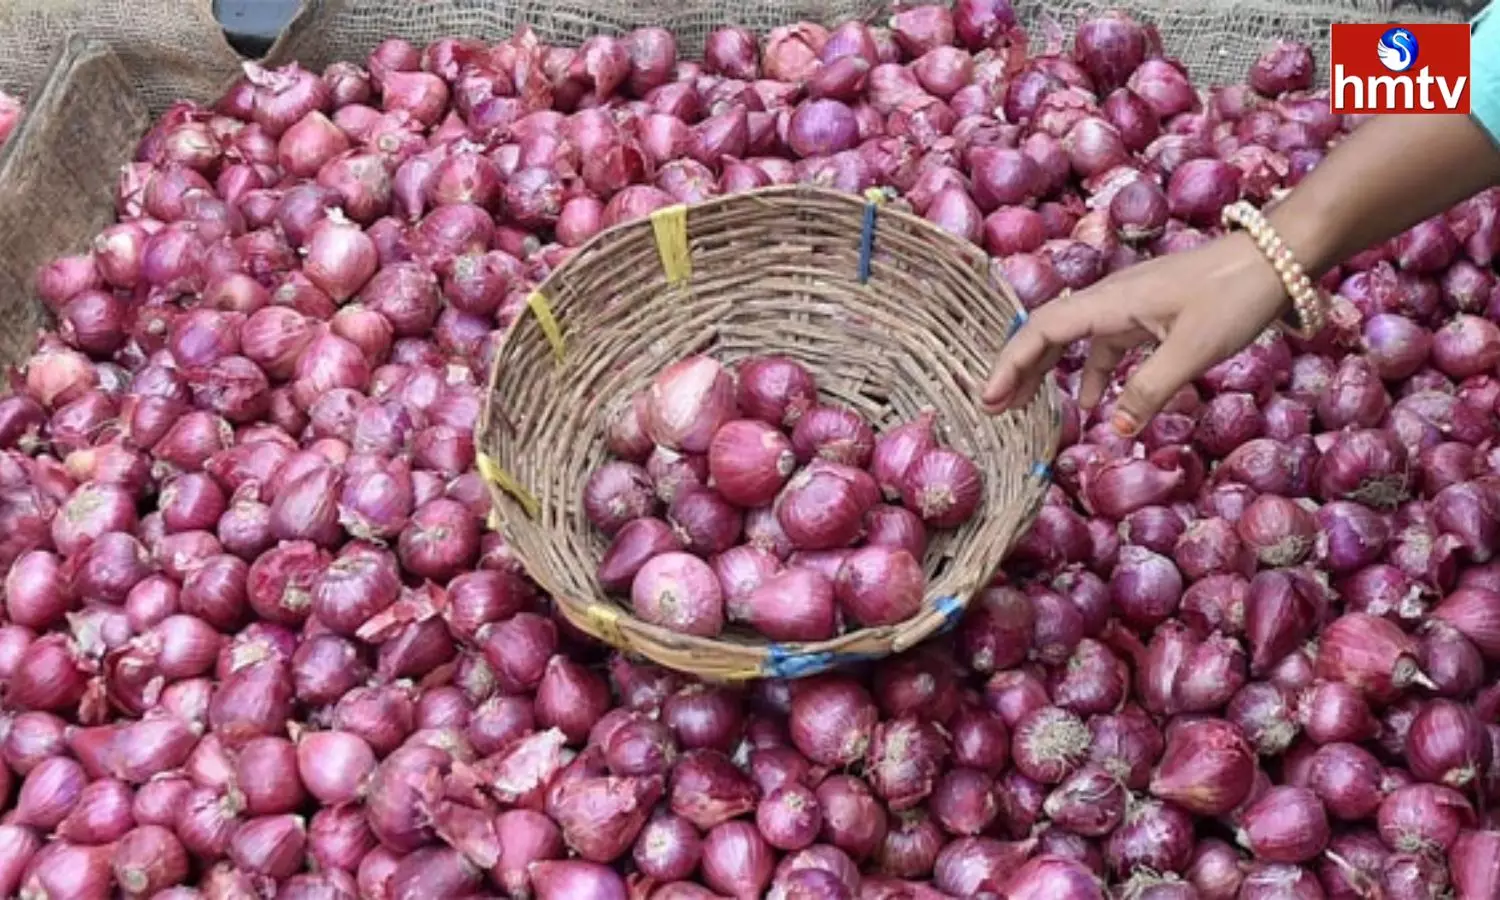 Govt To Sell Onions At Subsidised Rate Of Rs 25 Per Kg After Onion Price Hike